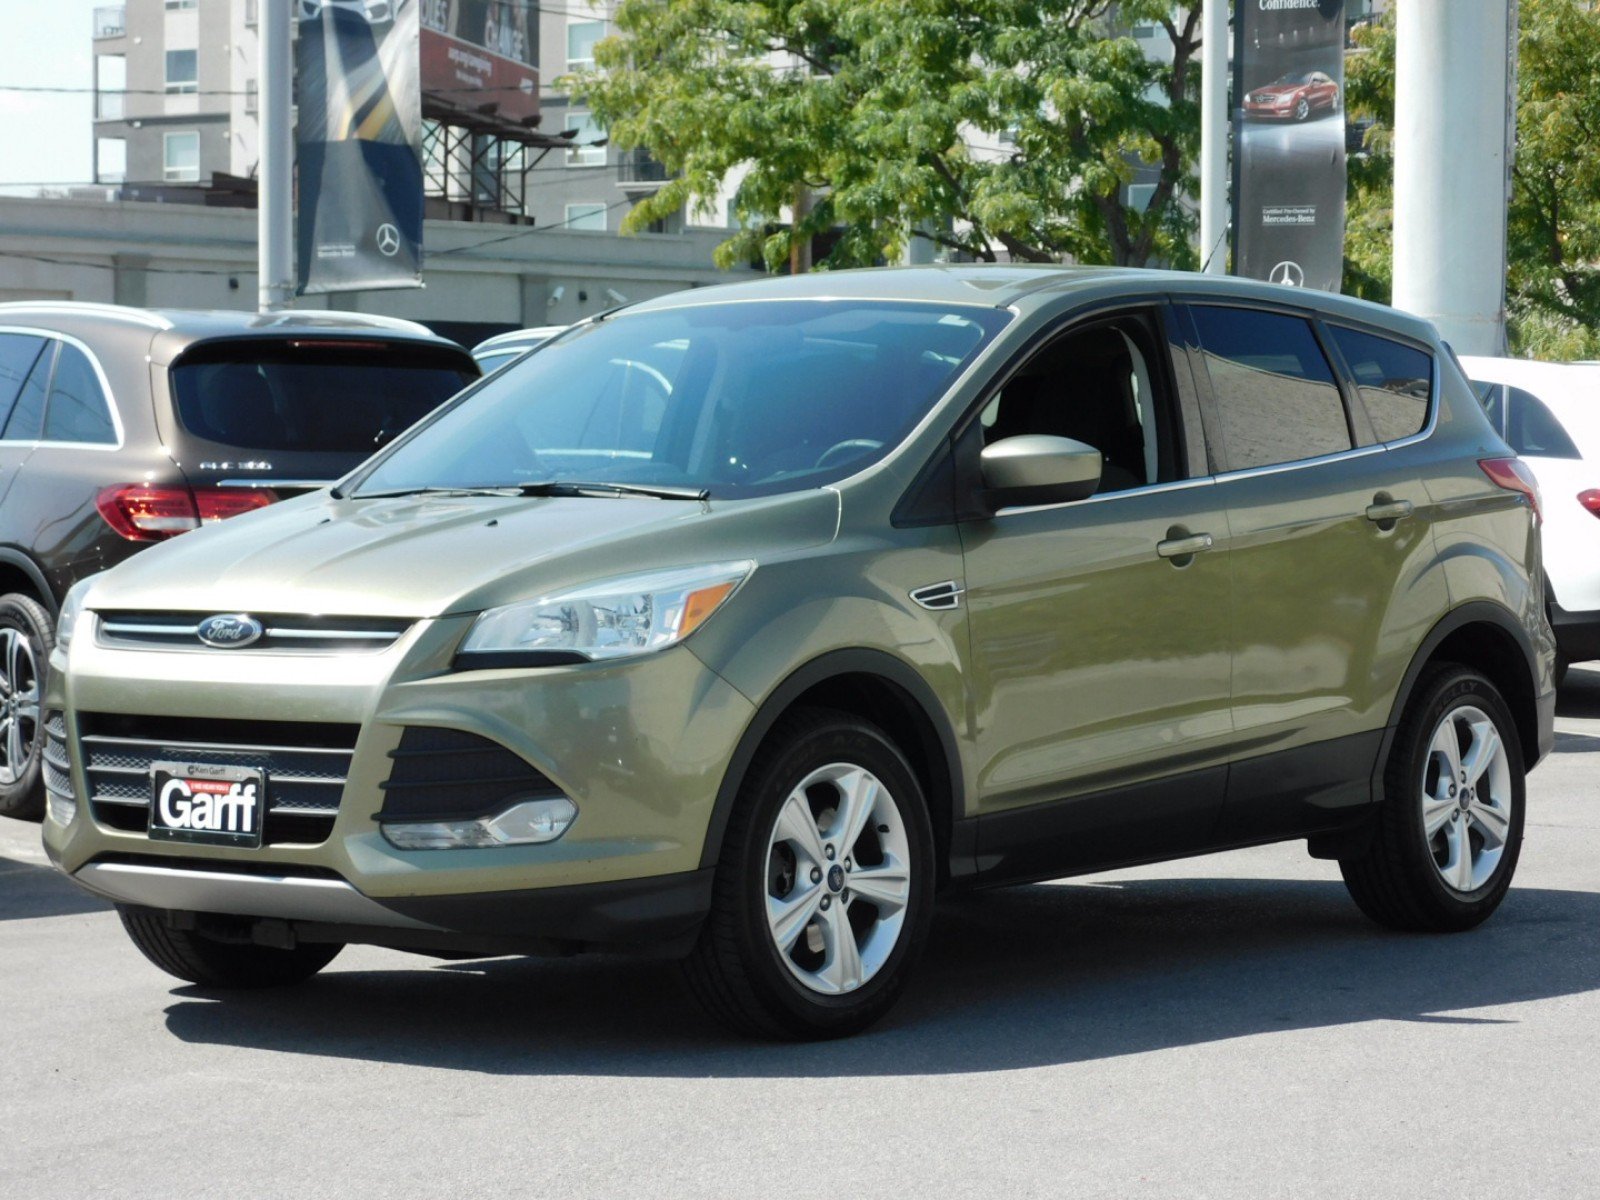 Pre Owned 2013 Ford Escape SE Sport Utility in Salt Lake City 1M8221B 